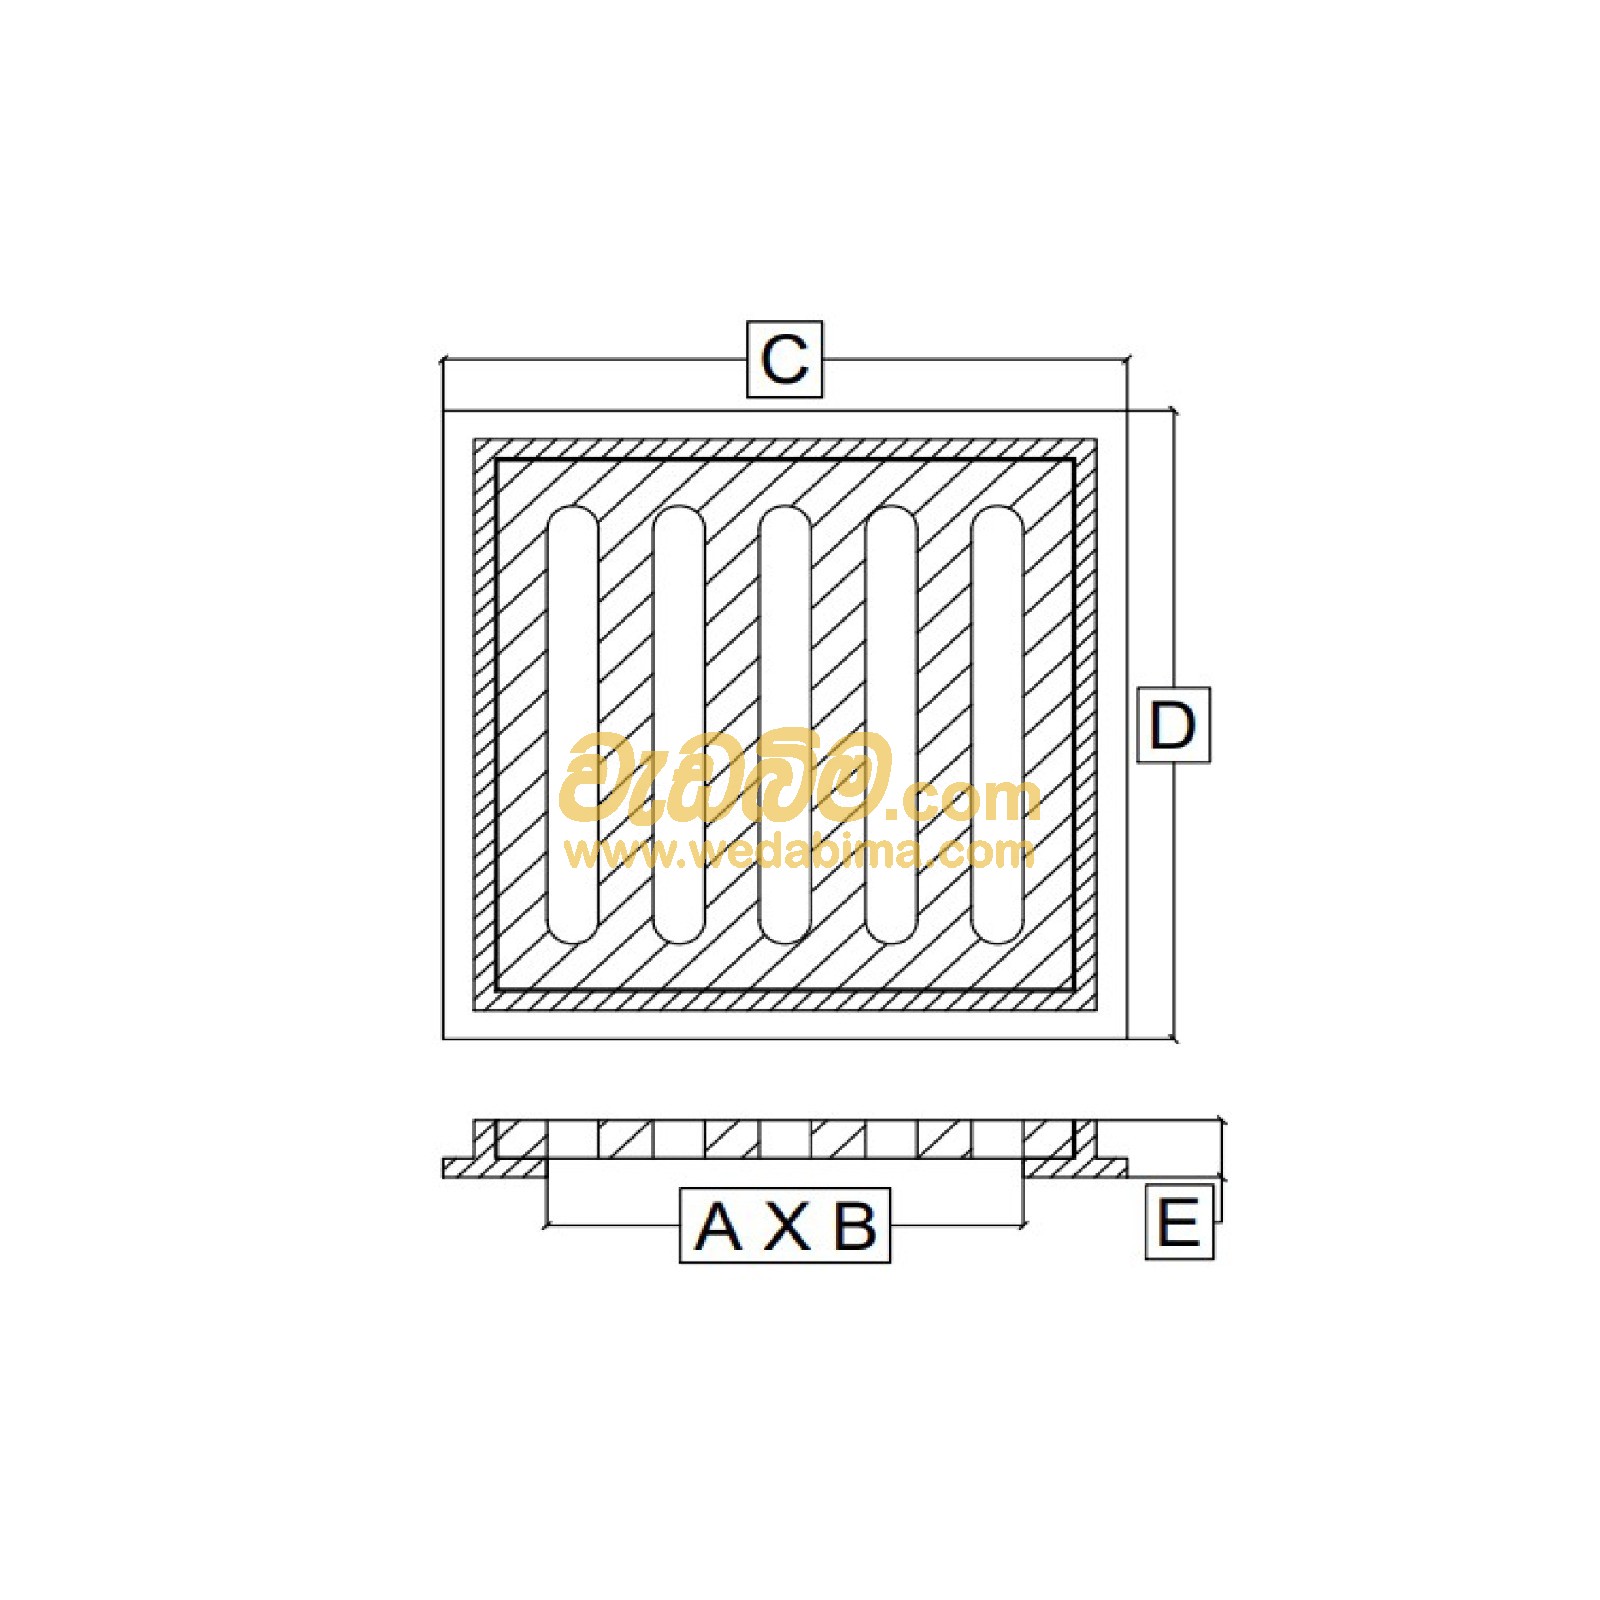 Cover image for 600mm x 600mm Cast-iron Grating cover